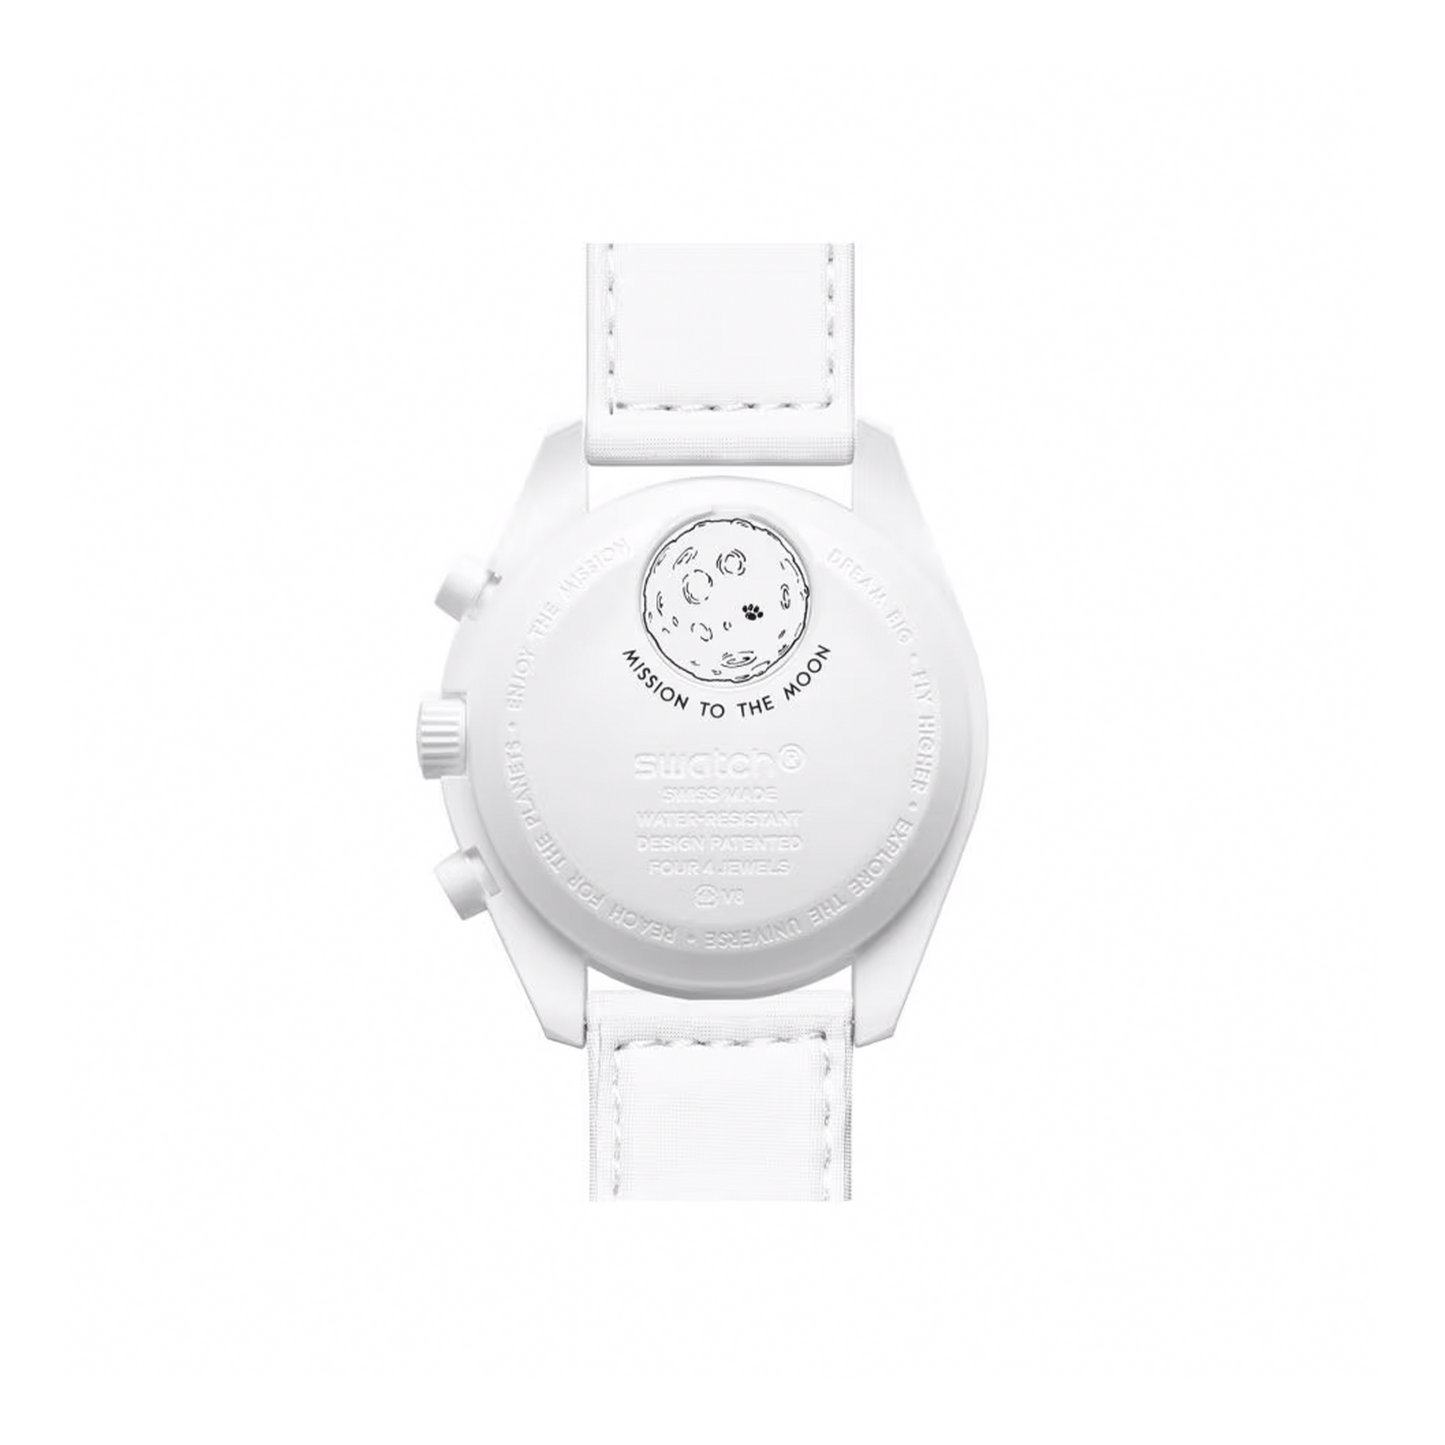 Swatch x Omega Bioceramic Moonswatch Mission To Moonphase Snoopy White